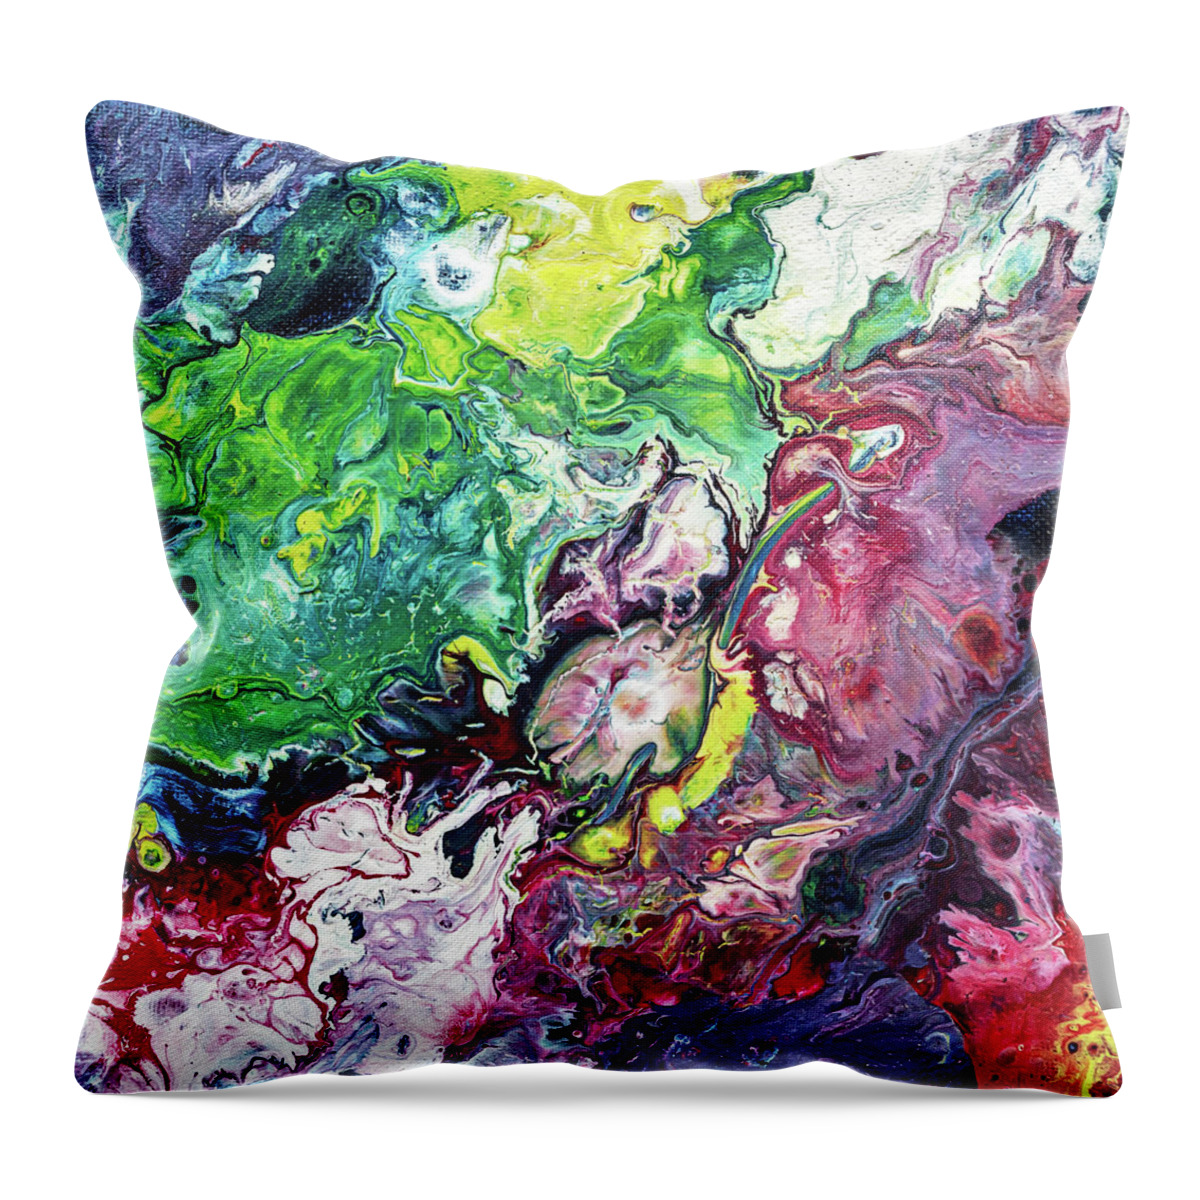 Fluid Throw Pillow featuring the painting Fluid Abstract Purple Green by Maria Meester